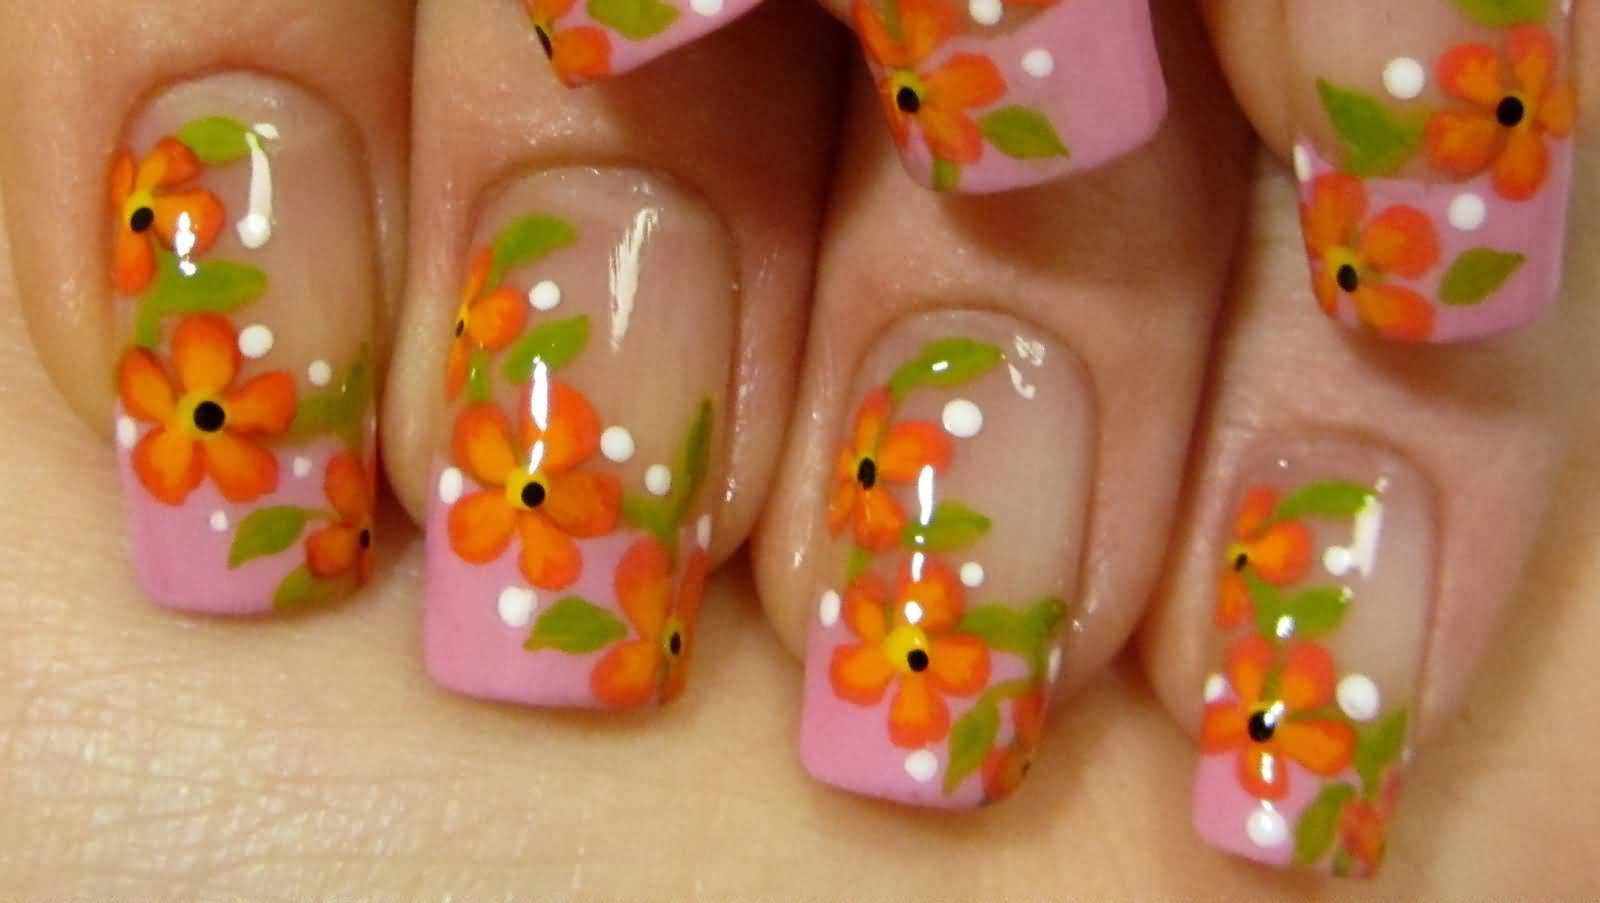 Pink French Tip With Red And Orange Flowers Vine Design Nail Art